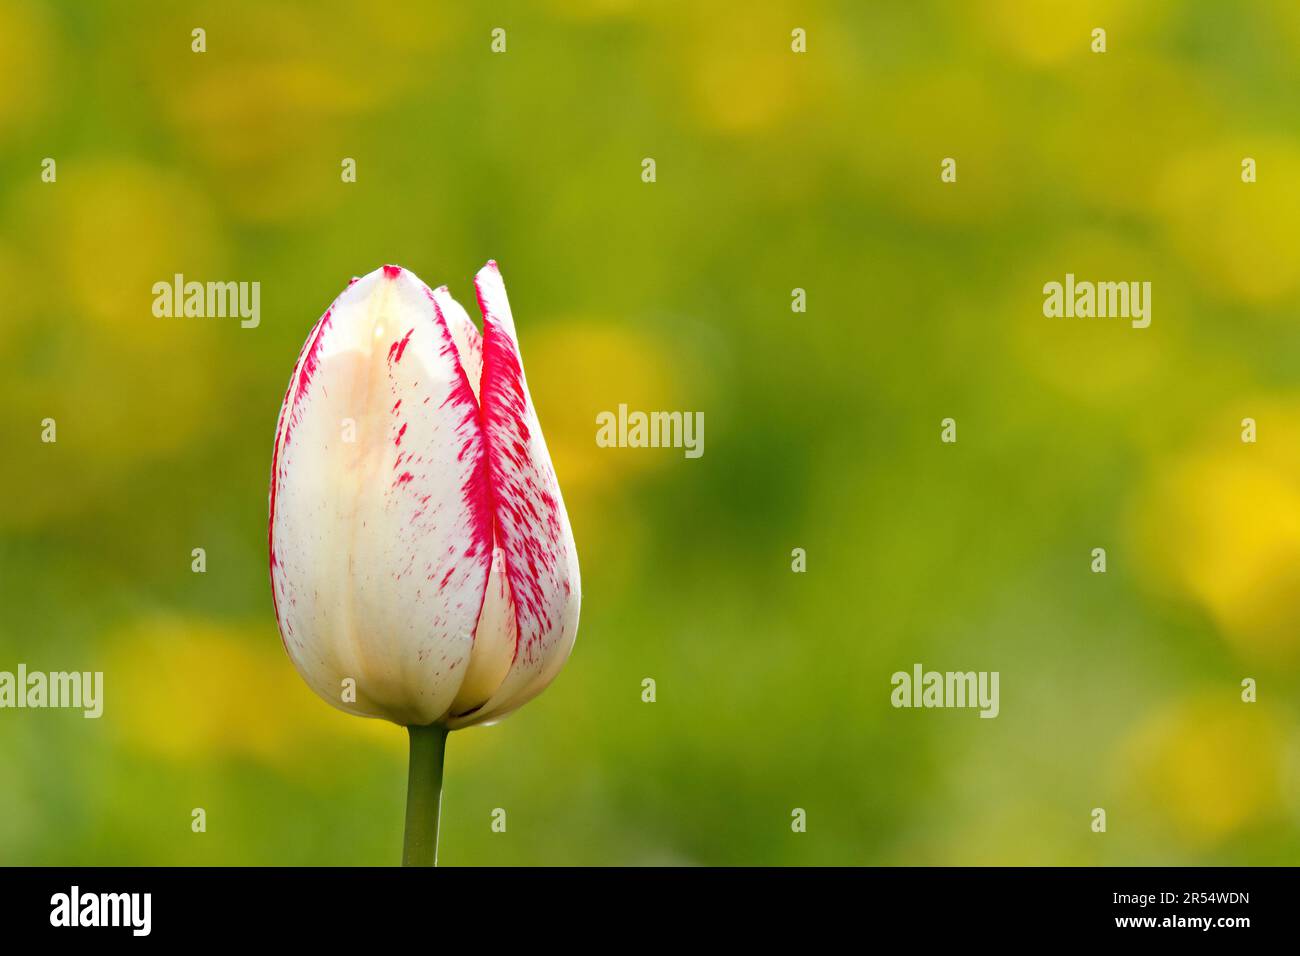 A beautiful pink and white tulip blooming next to afield of bright dandelions Stock Photo